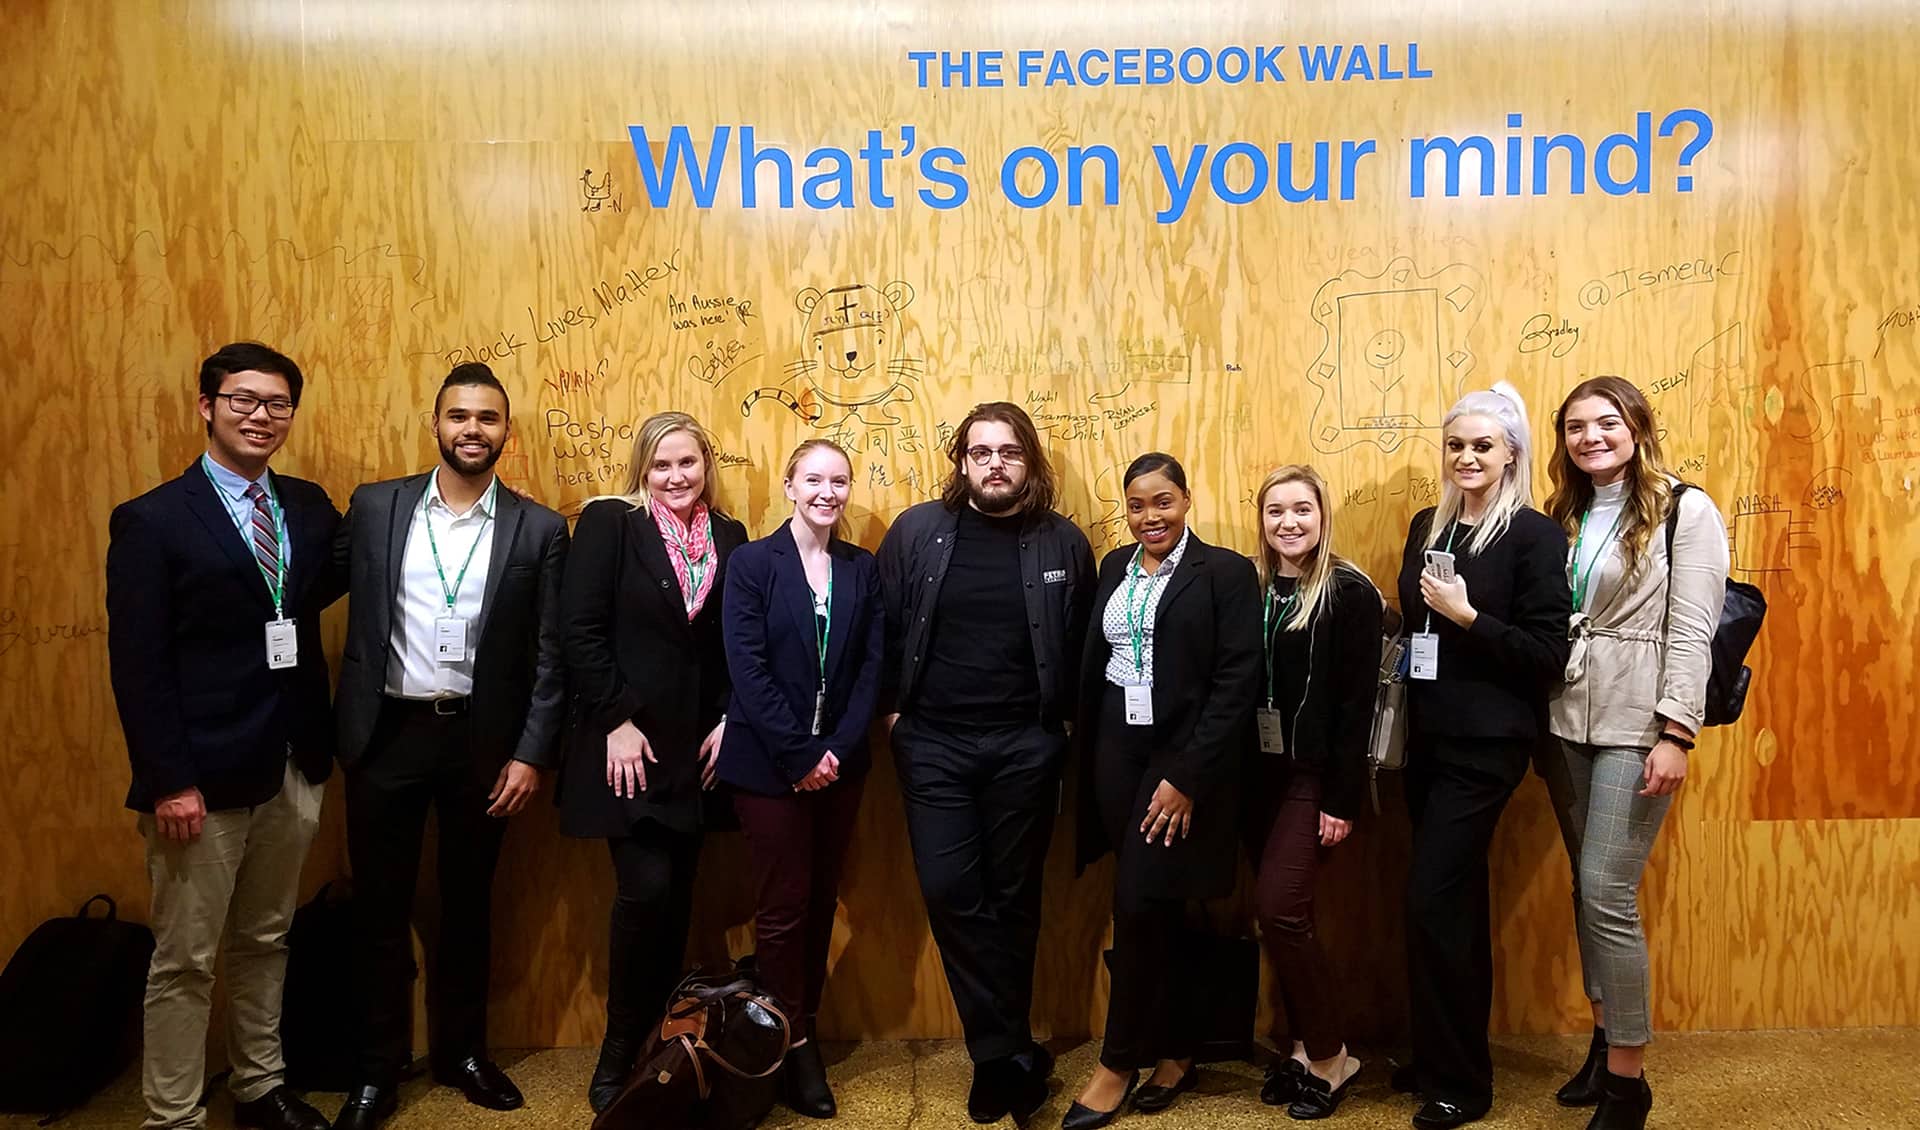 JWU Students in front of The Facebook Wall: What's on Your Mind?